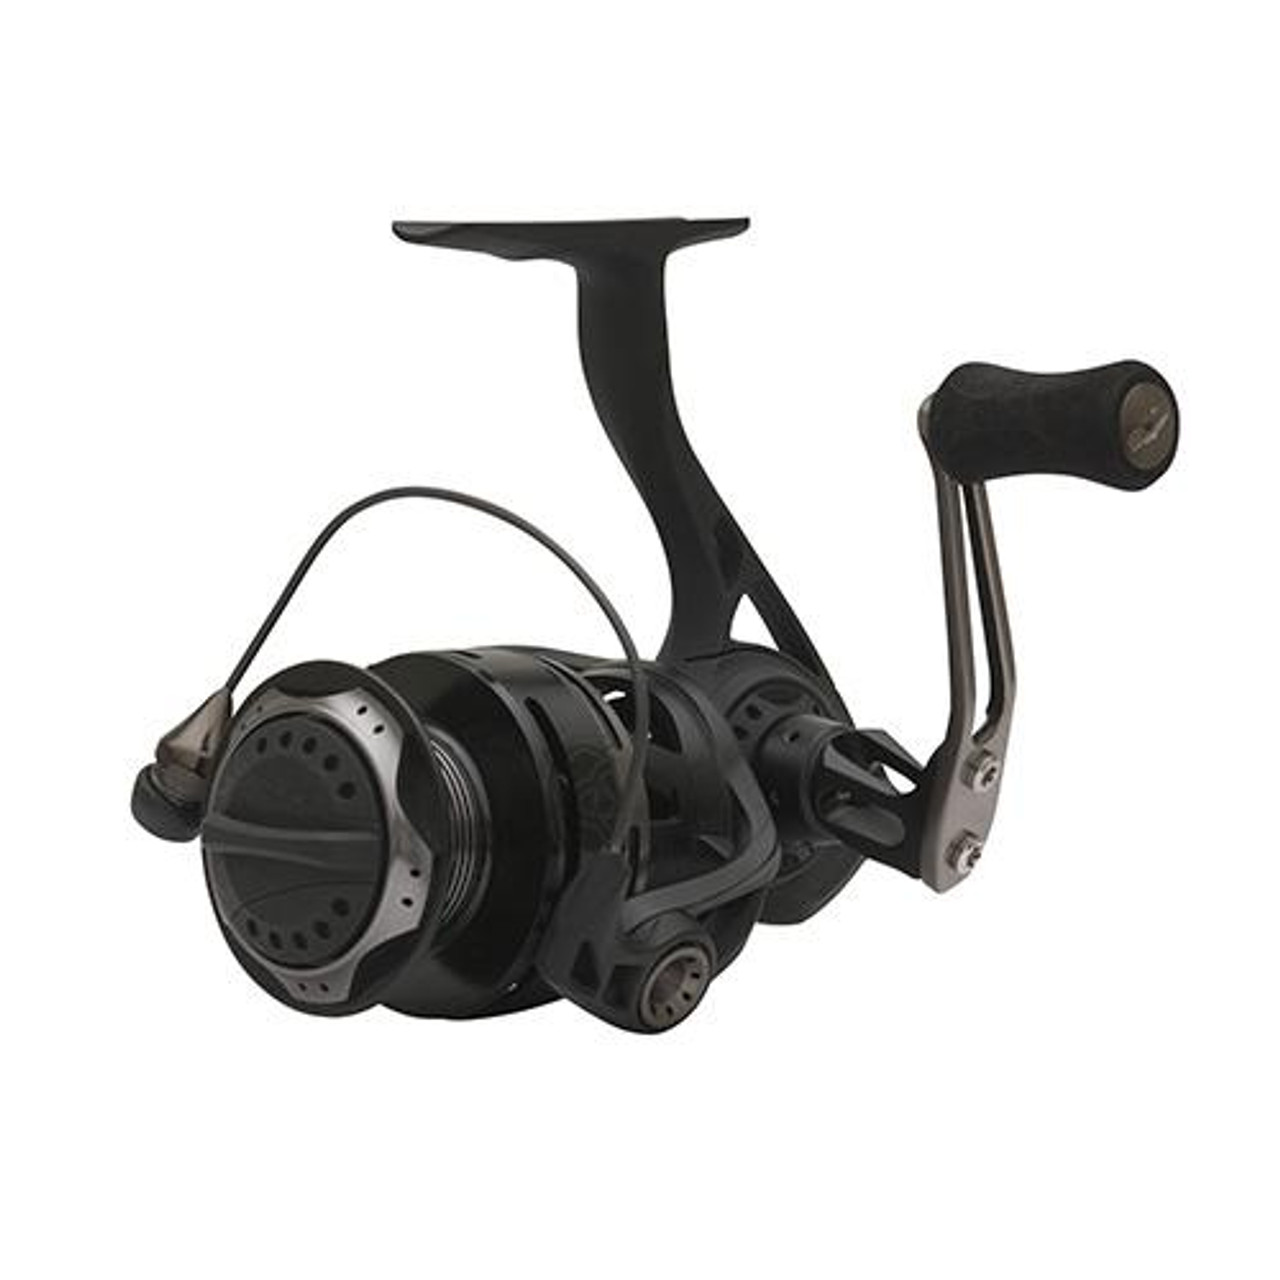 Zebco / Quantum Smoke S3 PT Inshore Spinning Reel Size 30, 6.0:1